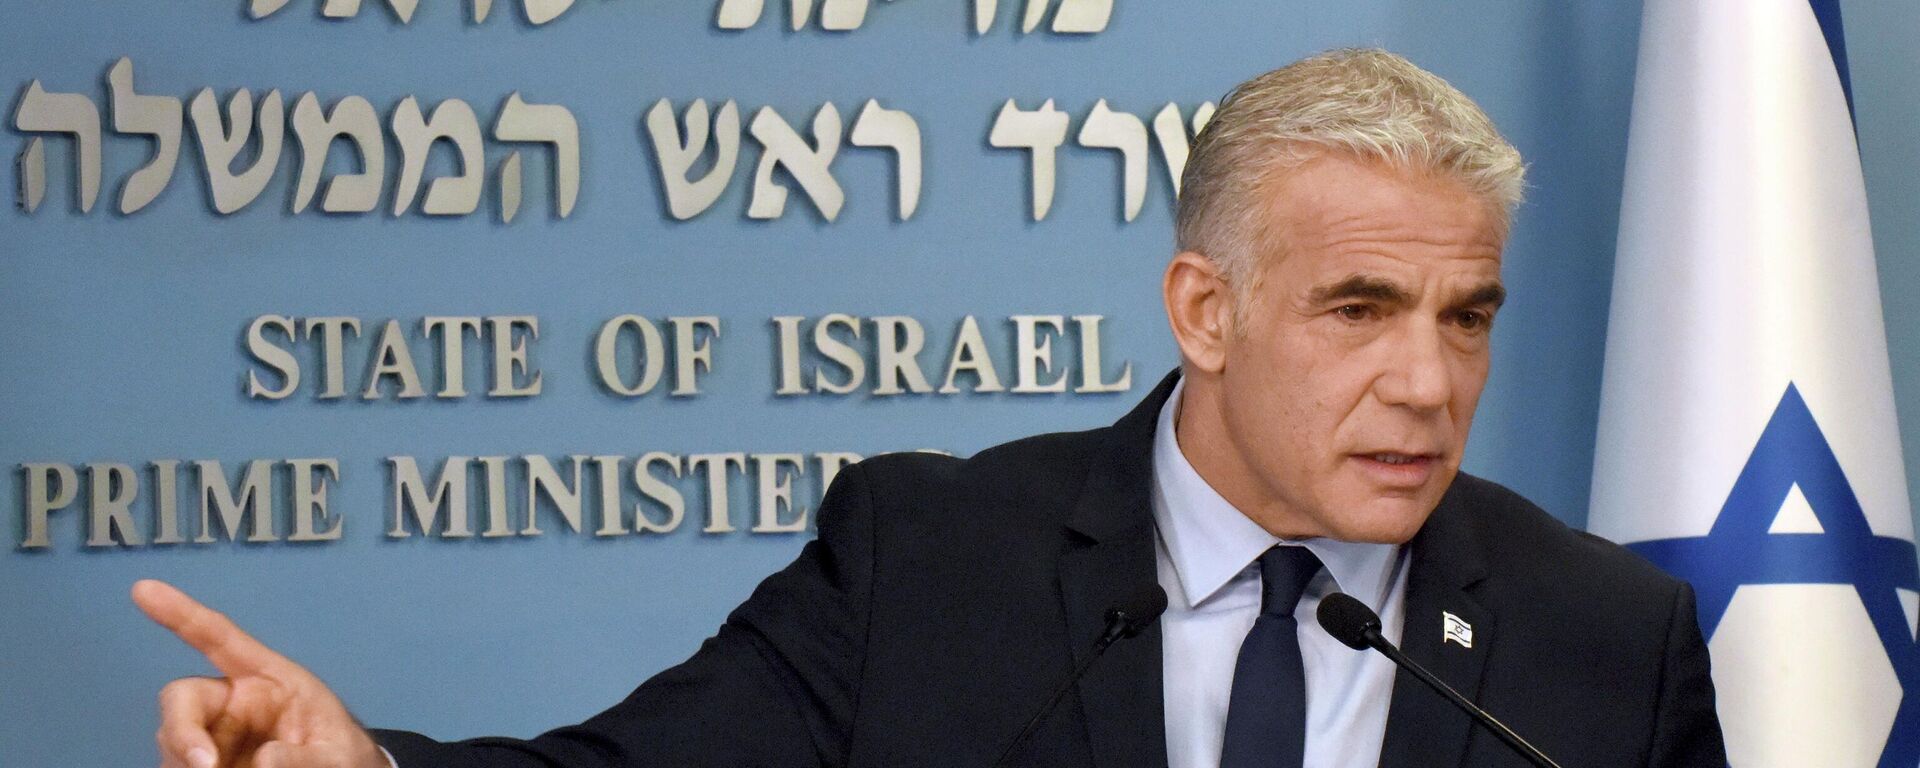 Israeli Prime Minister Yair Lapid speaks about Iran at a security briefing for the foreign press at the Prime Minister's office in Jerusalem, Wednesday, Aug. 24, 2022. Lapid called on U.S. President Joe Biden and Western powers to call off an emerging nuclear deal with Iran, saying an agreement would fail to prevent Iran from developing a nuclear bomb and reward it with billions of dollars to fund Israel's enemies. Israel's caretaker prime minister used stark language on Wednesday in his criticism of the expected agreement. (Debbie Hill/Pool via AP) - Sputnik International, 1920, 12.03.2023